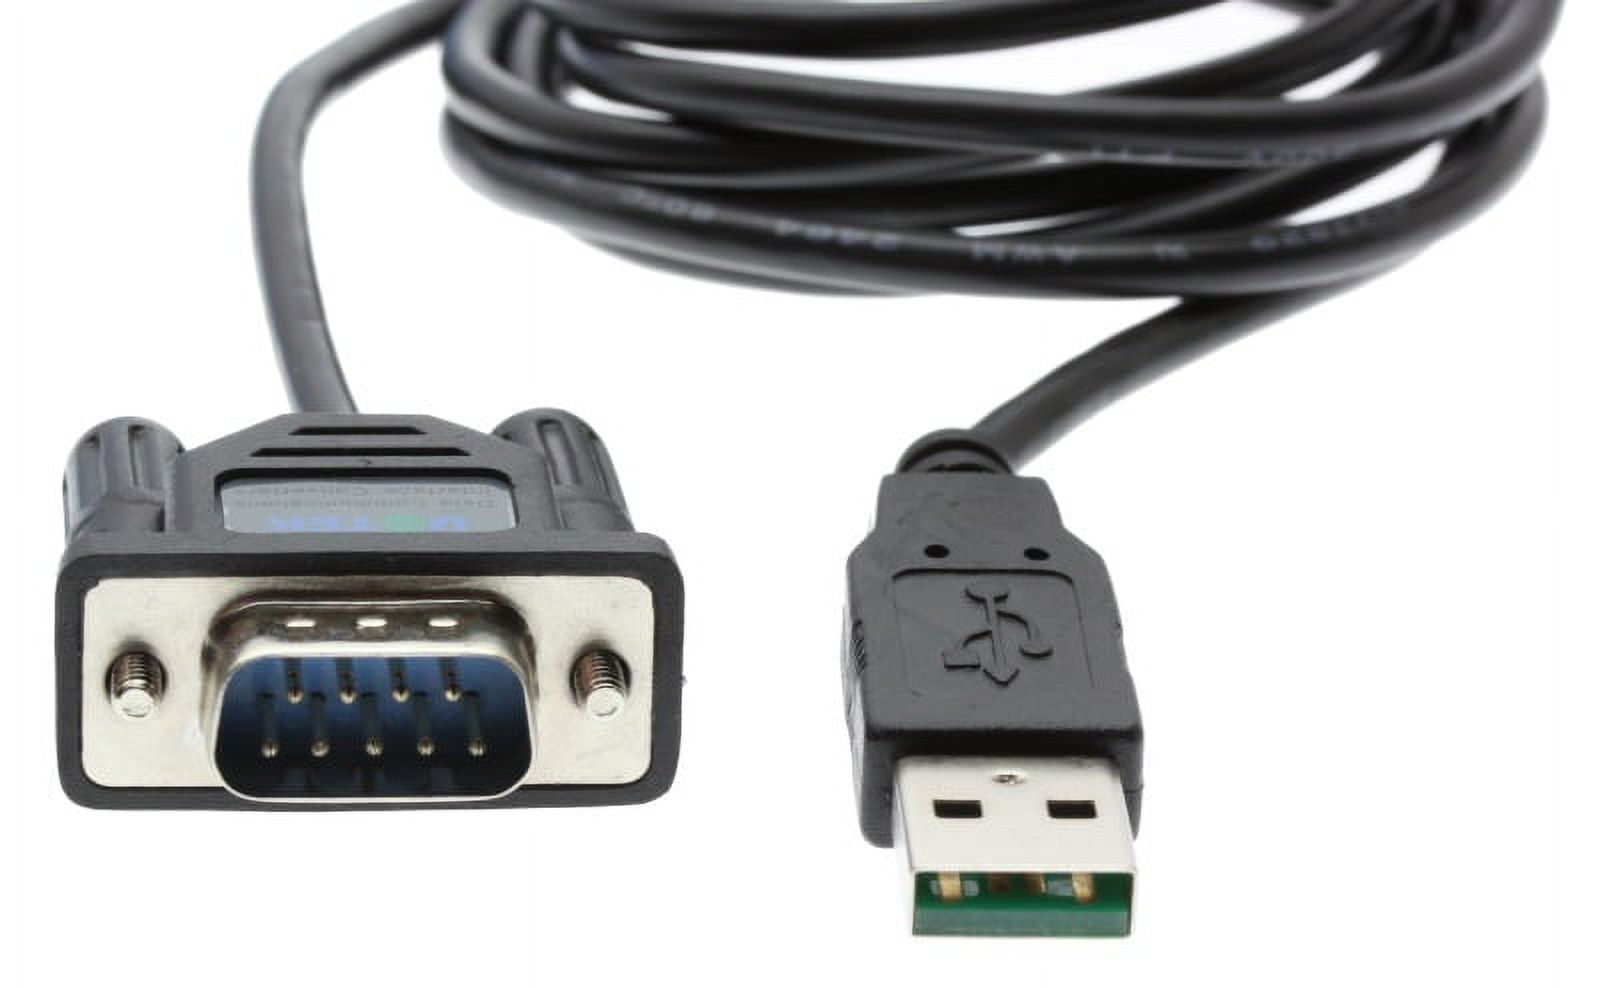 Gearmo 36inch FTDI USB to Serial Cable for MA PC Linux with Windows 10 Certified Drivers - image 3 of 3